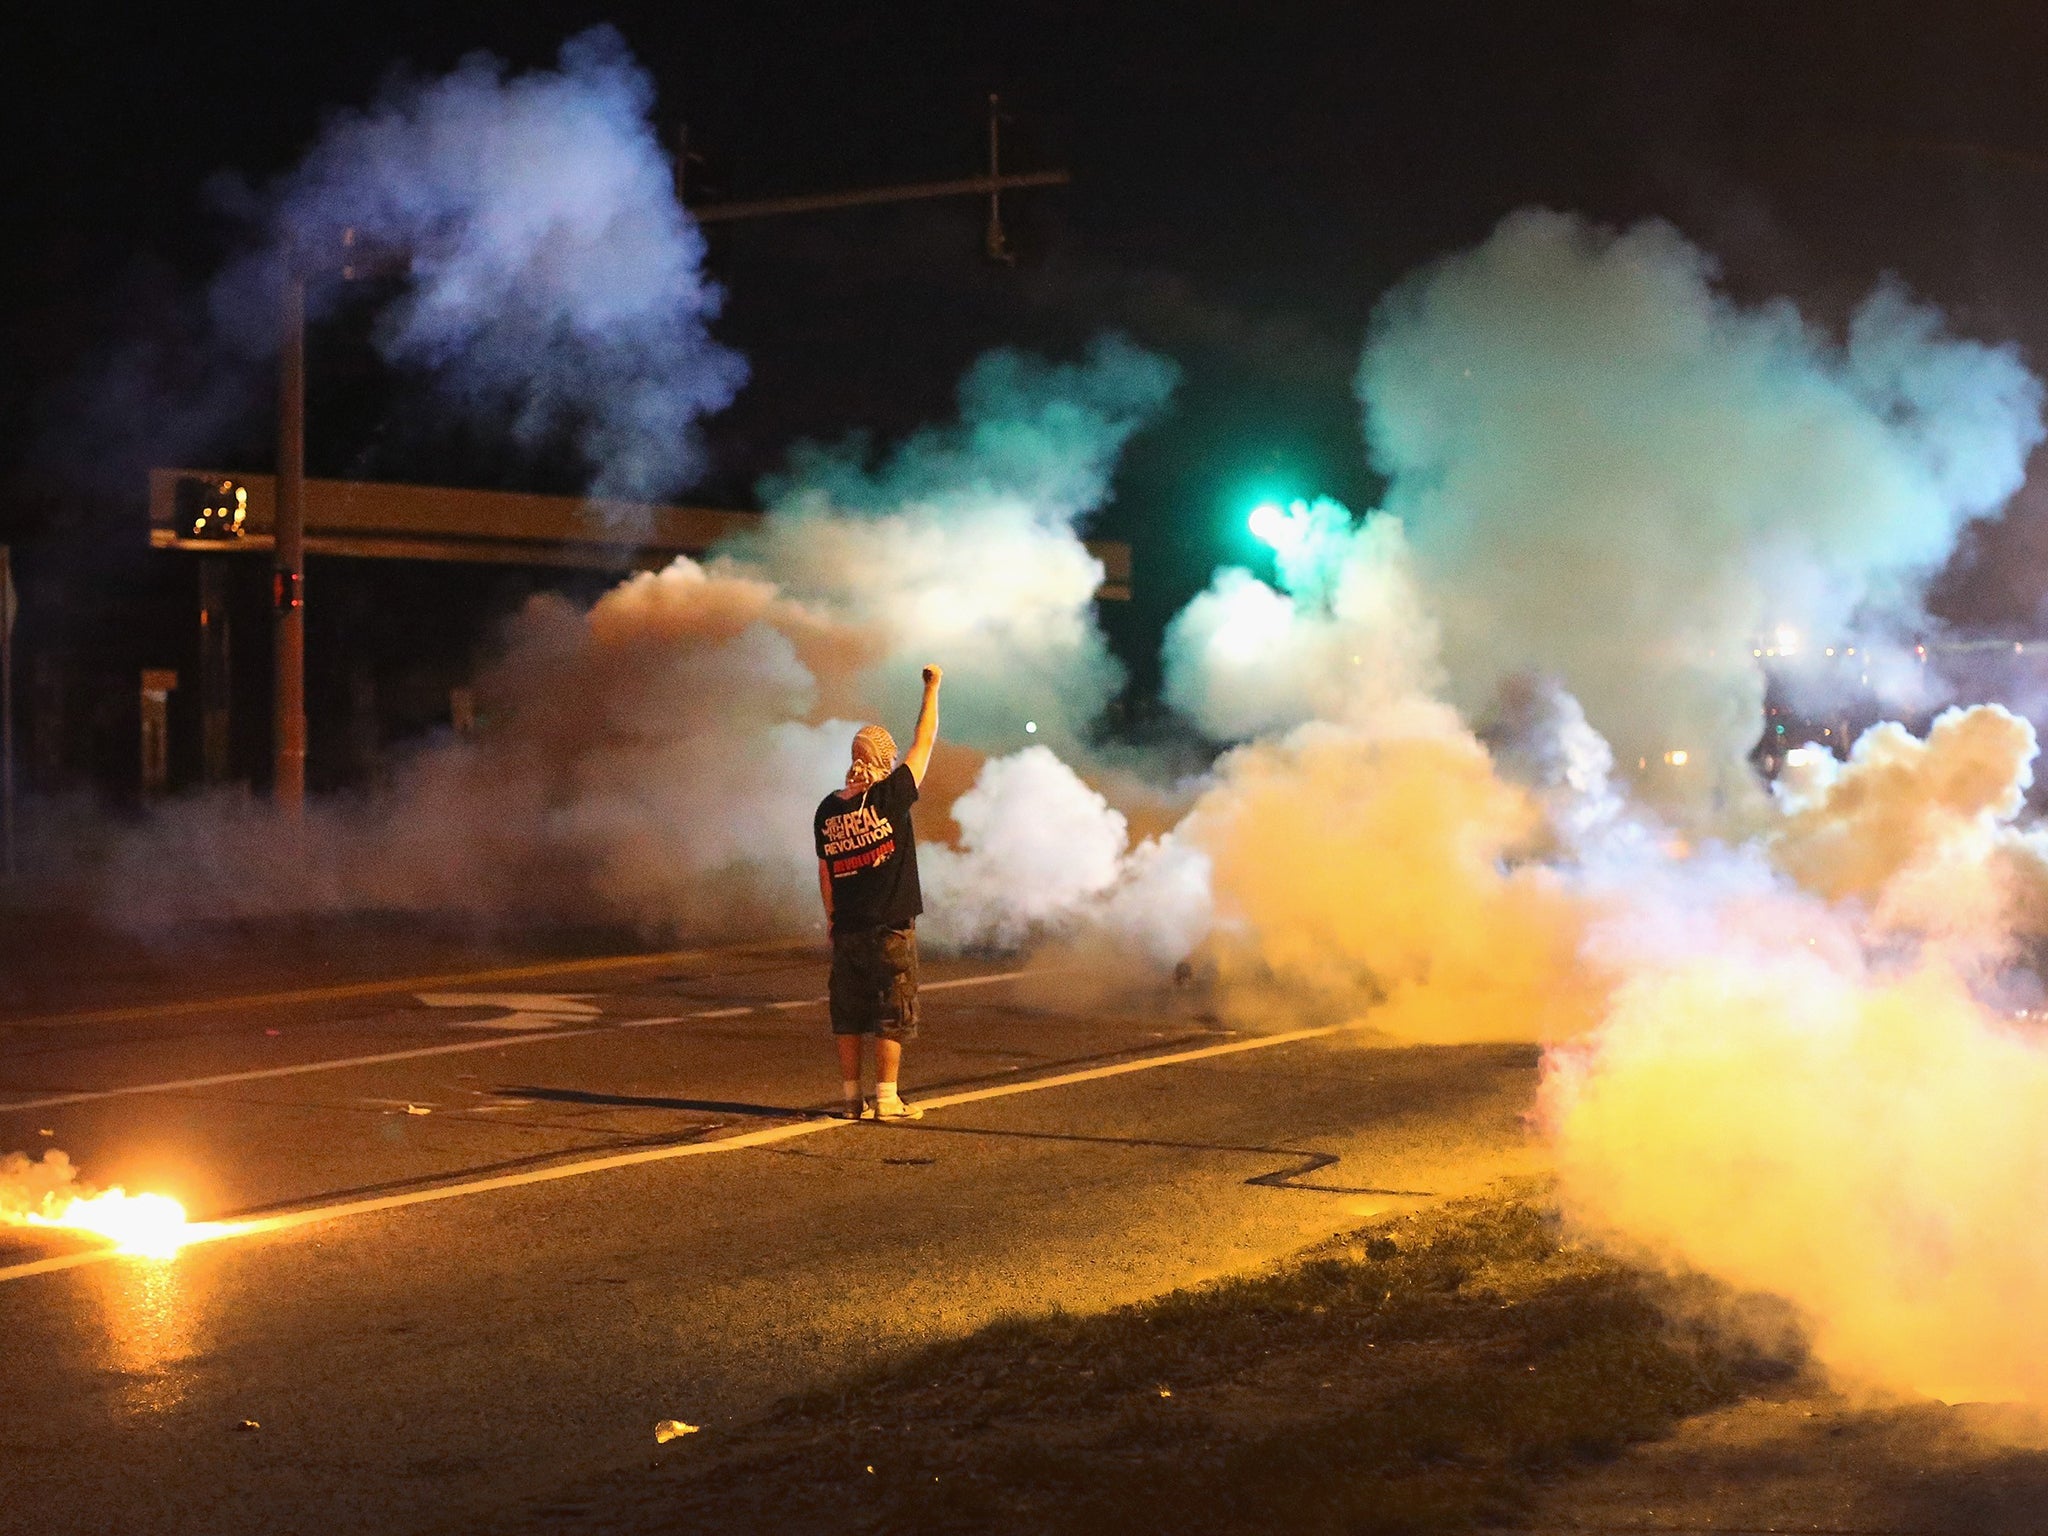 A demonstrator, protesting the shooting death of teenager Michael Brown, stands his ground as police fire tear gas in Ferguson 